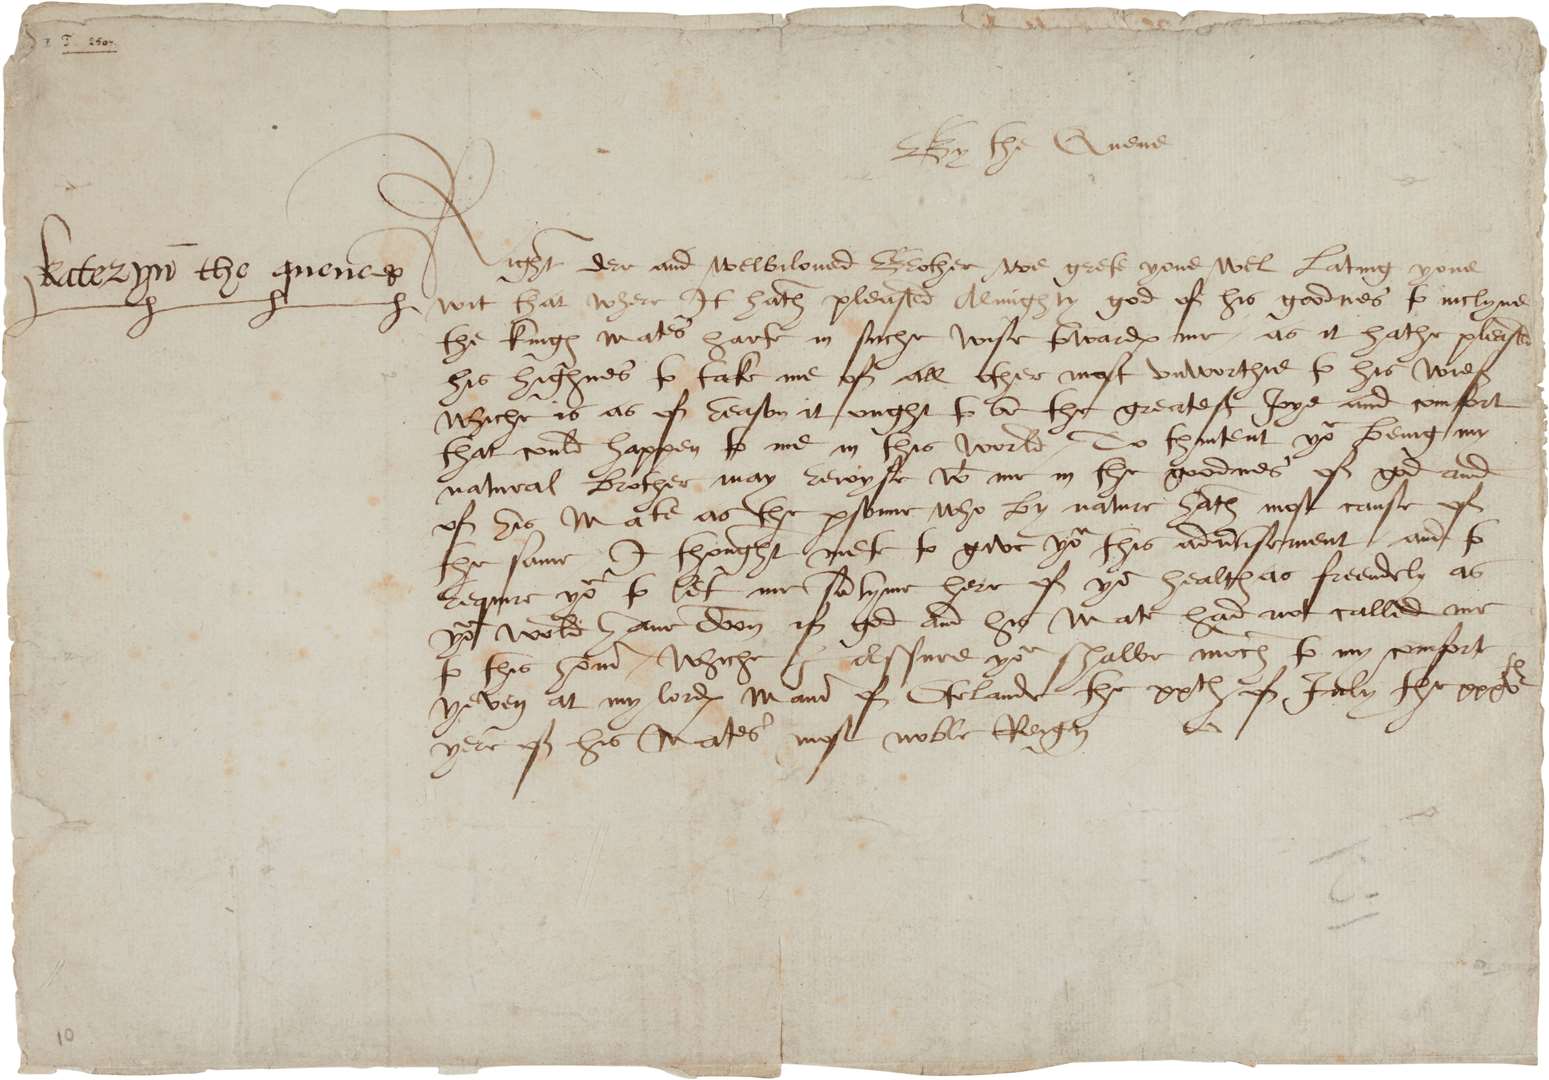 A letter written by Catherine Parr to her brother William announcing her marriage to Henry VIII in 1543 also sold at the auction (Sotheby’s/PA)